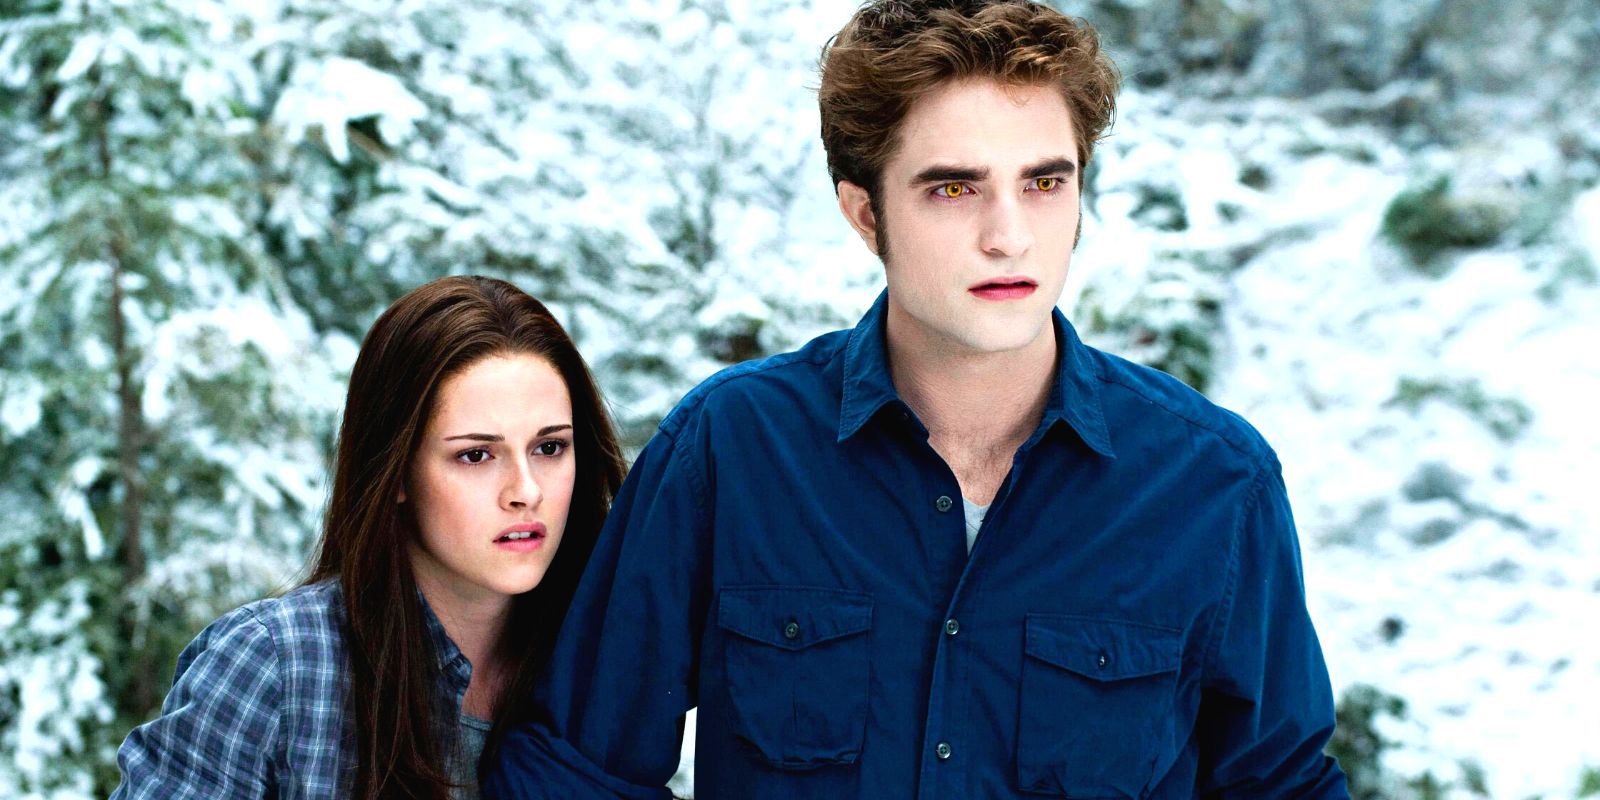 Bella and Edward looking aghast at something while standing in a snowy forest